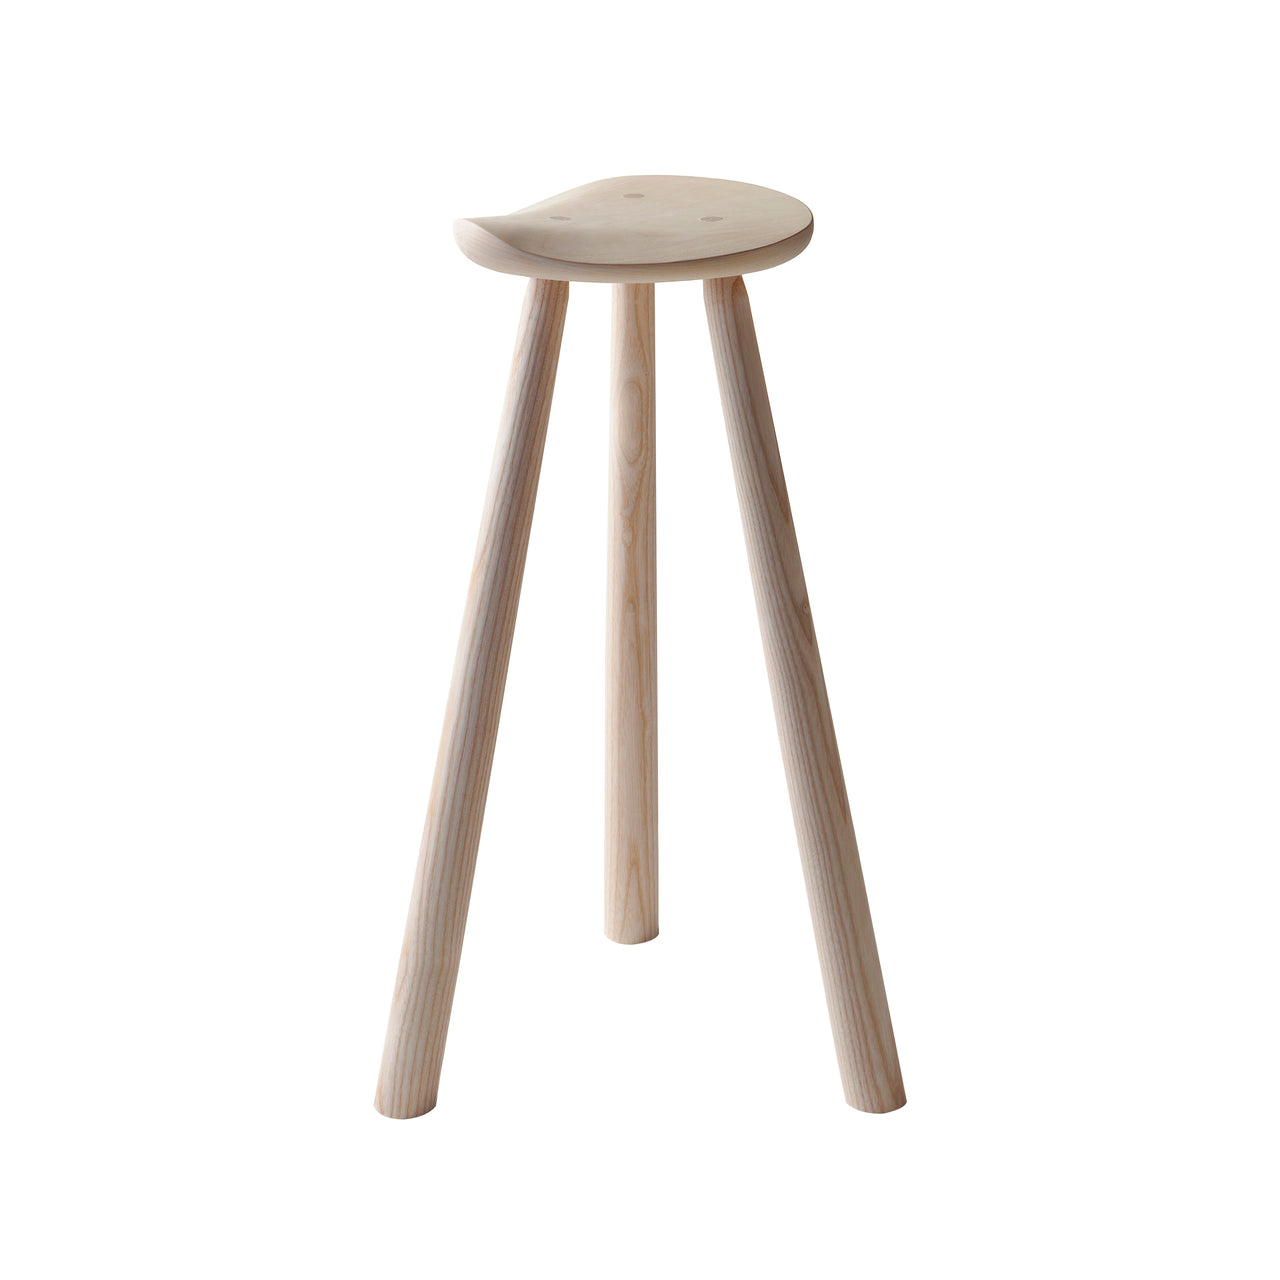 Classic RMJ Stool: Counter + Natural